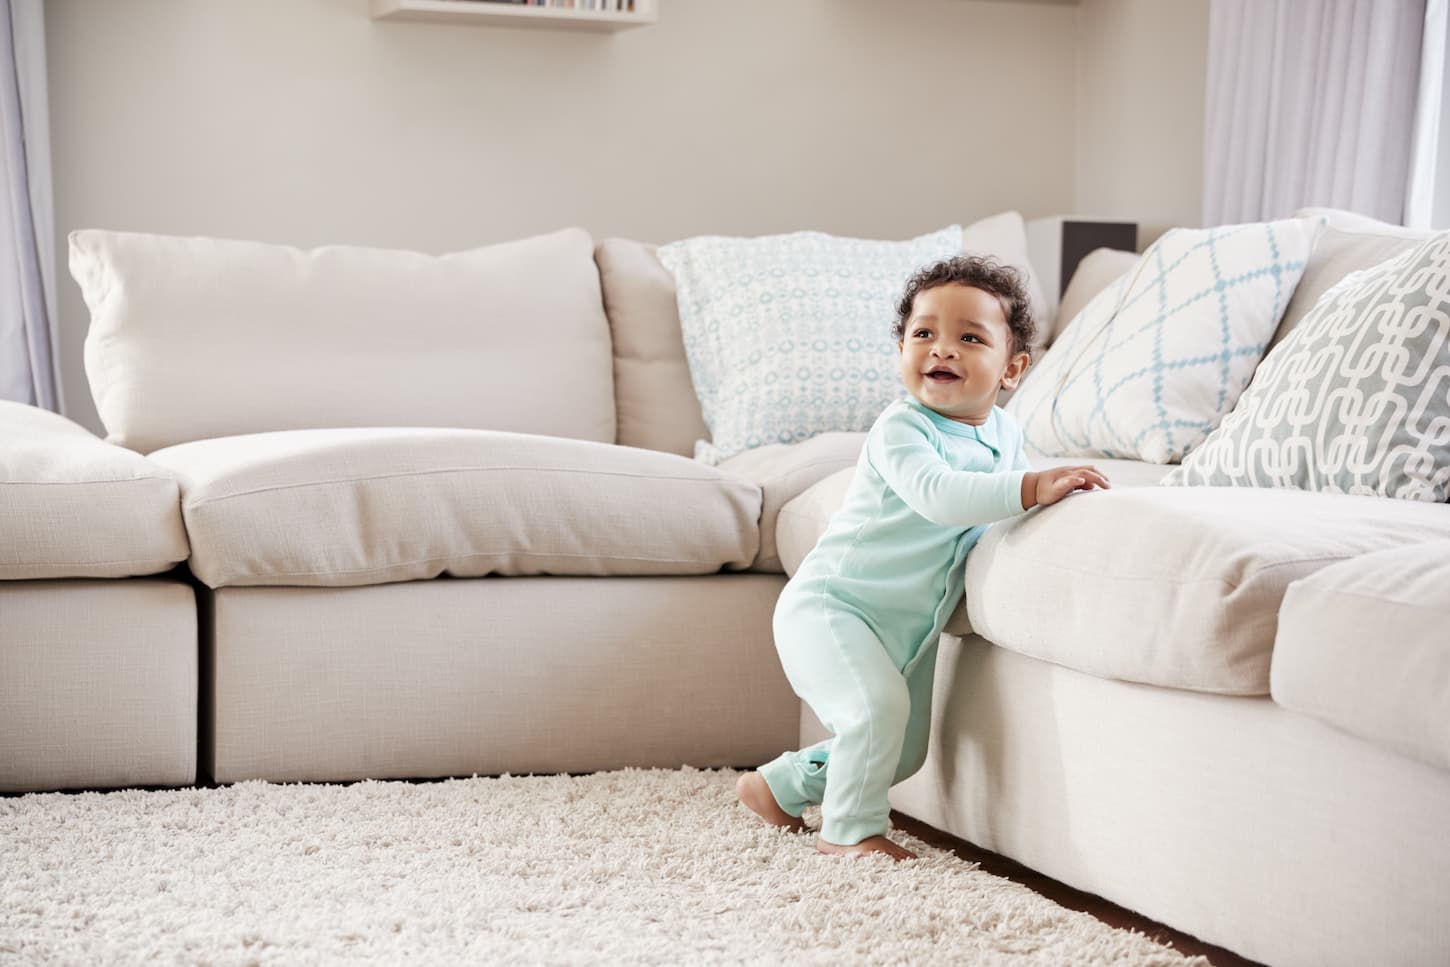 An image of a toddler boy playing in a sitting room with his pastel green sleepsuit.